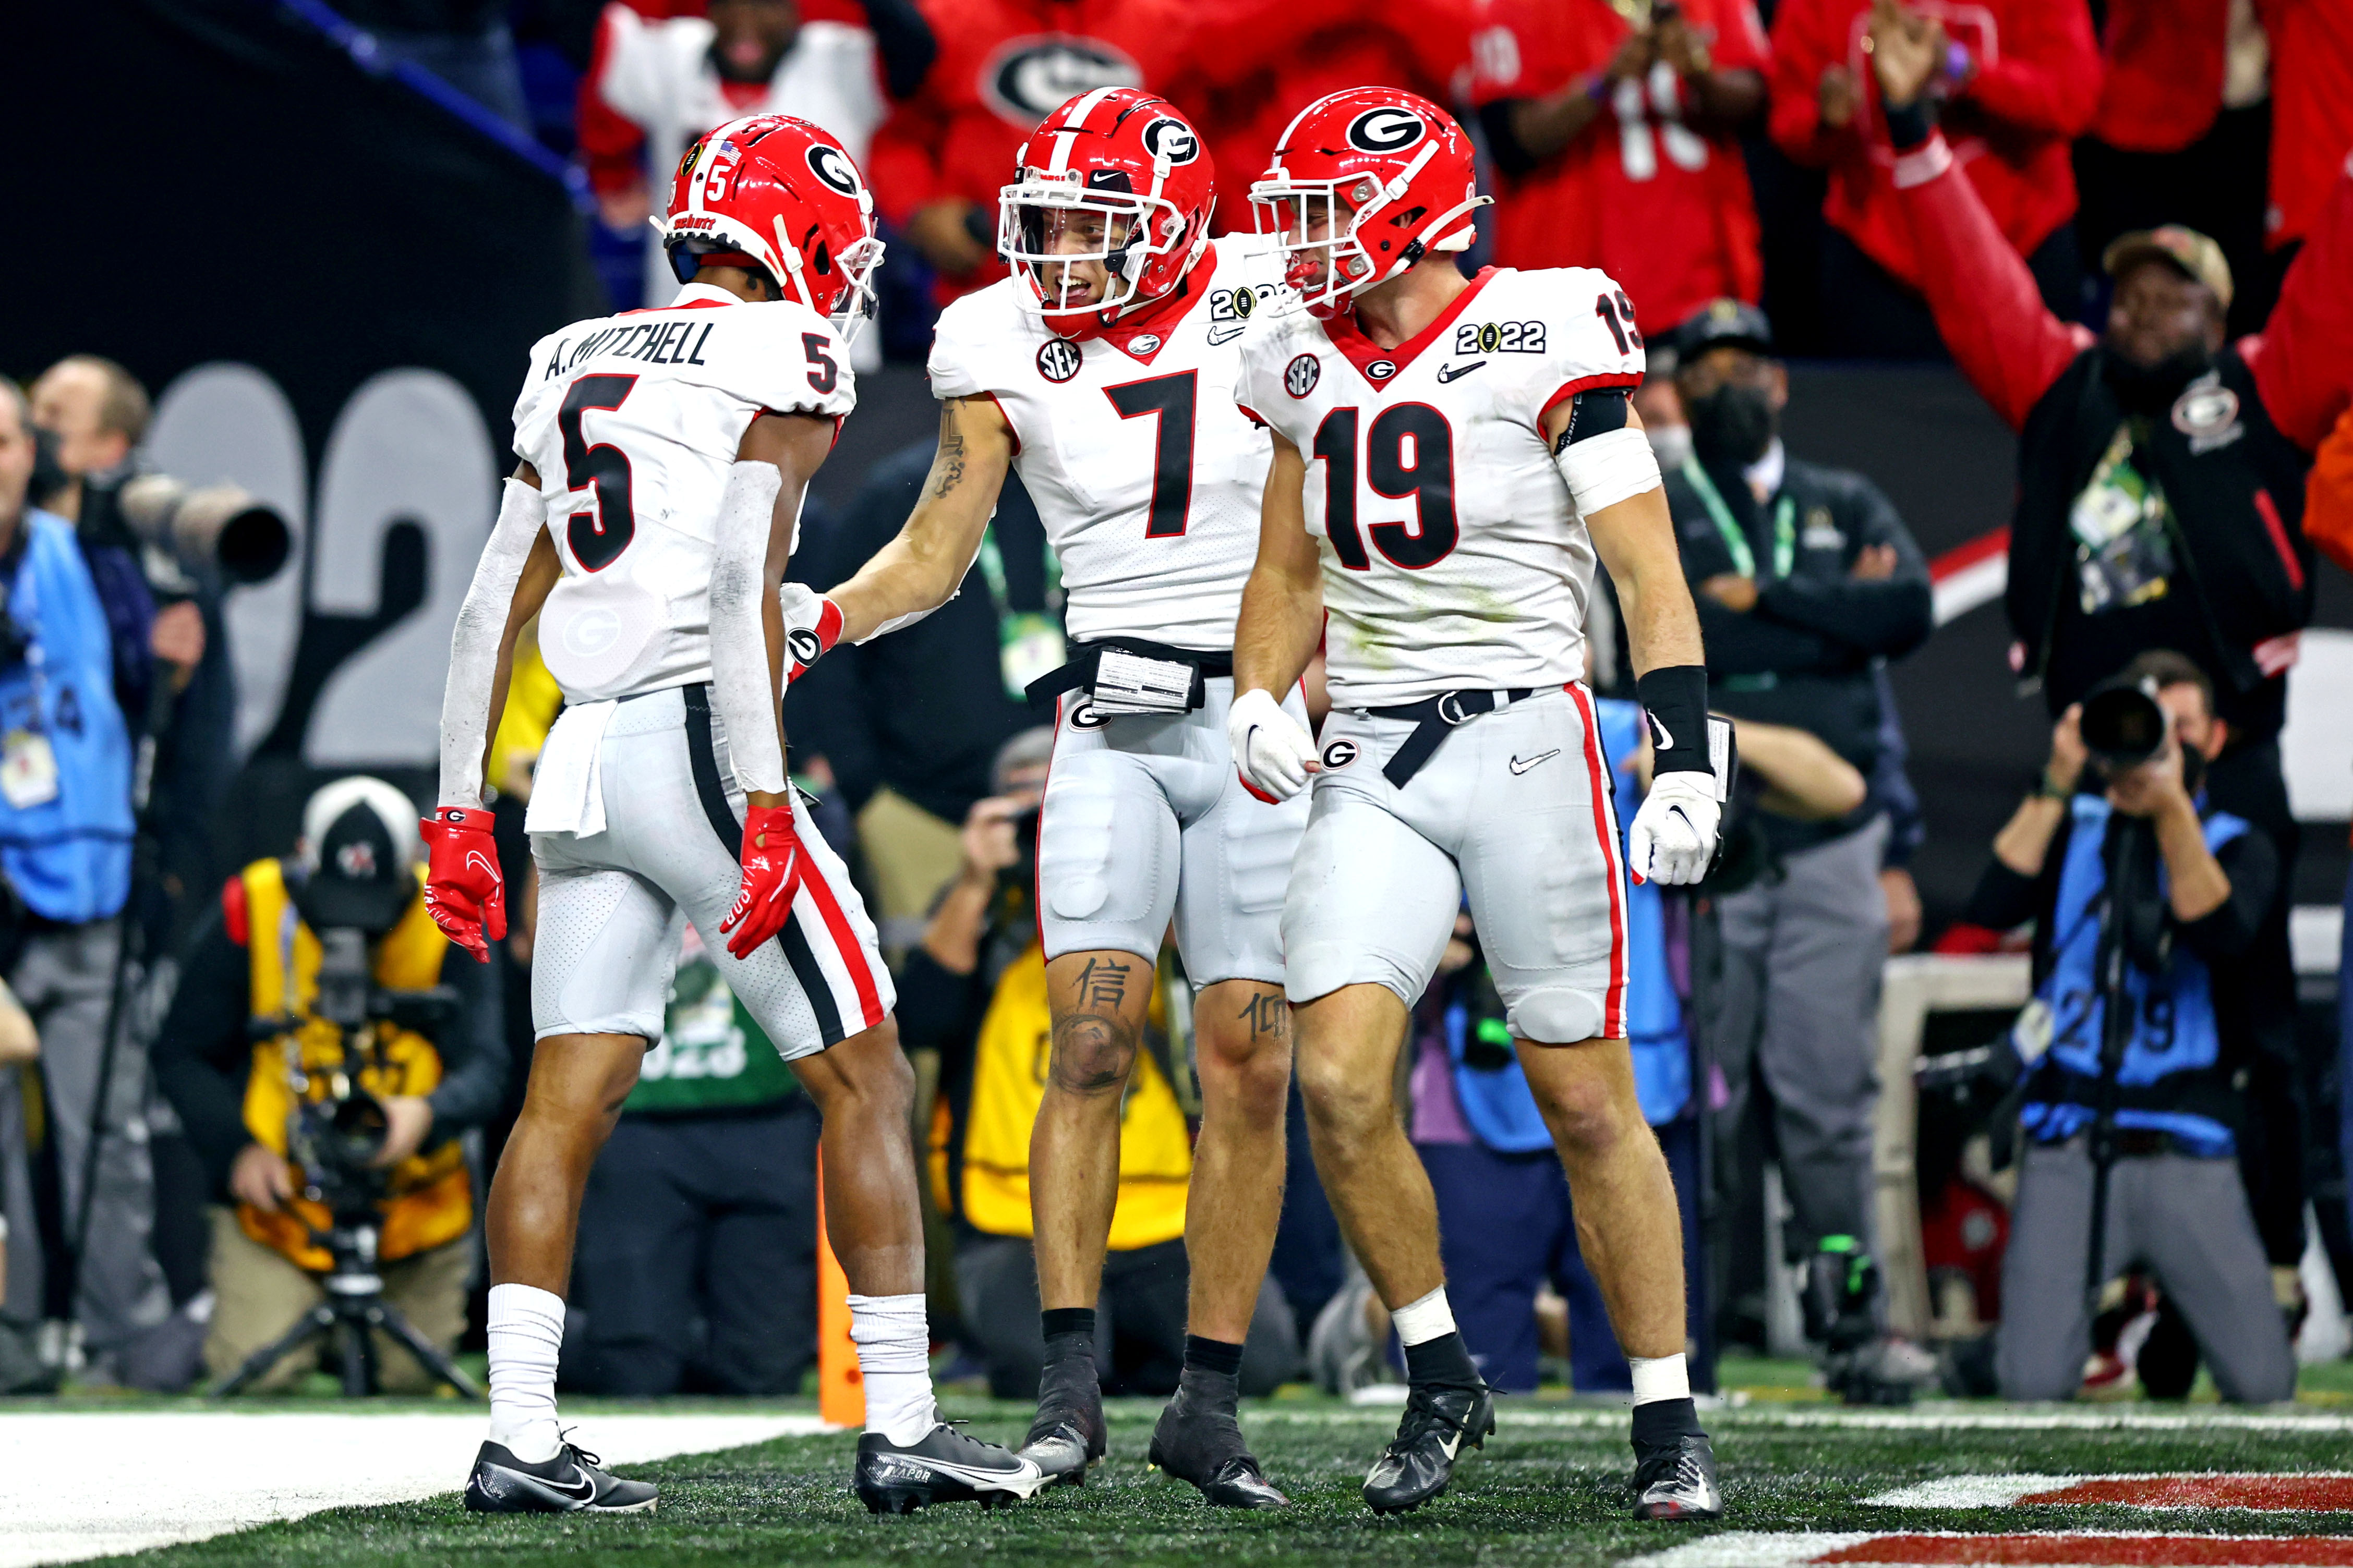 Georgia Bulldogs wide receiver Adonai Mitchell celebrates with wide receiver Jermaine Burton and tight end Brock Bowers after scoring a touchdown during the fourth quarter against the Alabama Crimson Tide in the 2022 CFP college football national championship game at Lucas Oil Stadium.